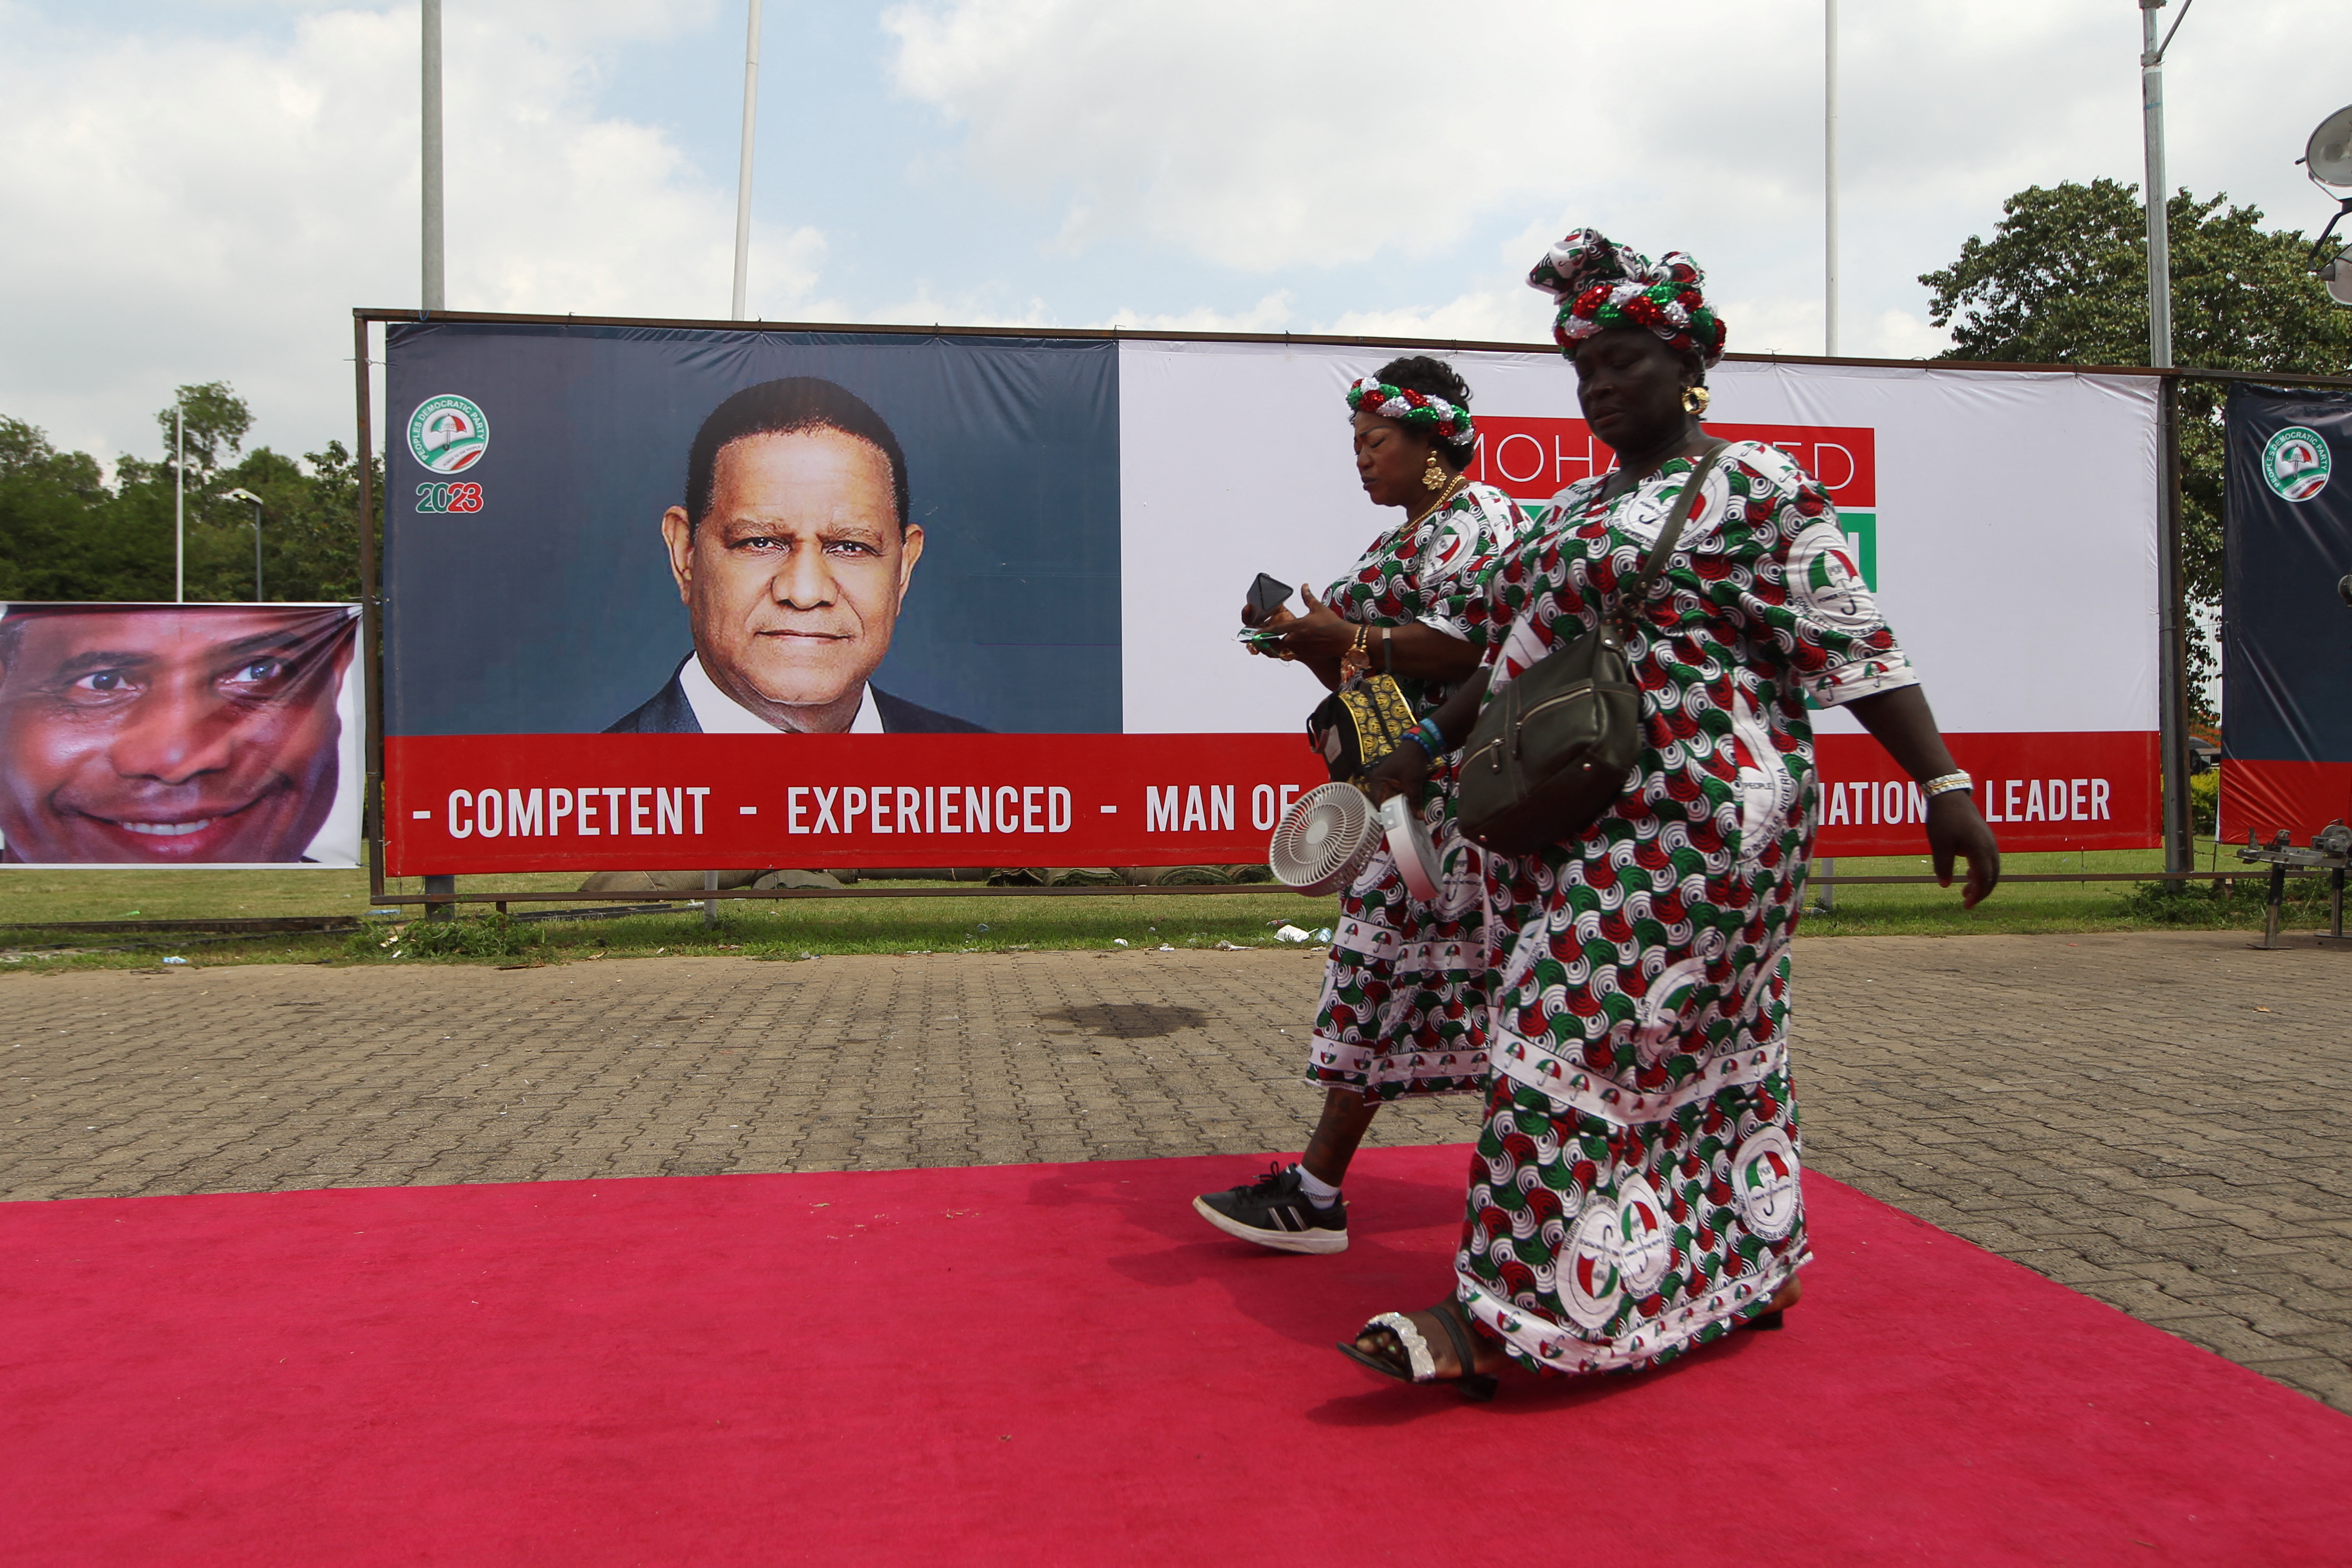 Two members of the People's Democratic Party arrive at the National convention centre in Abuja